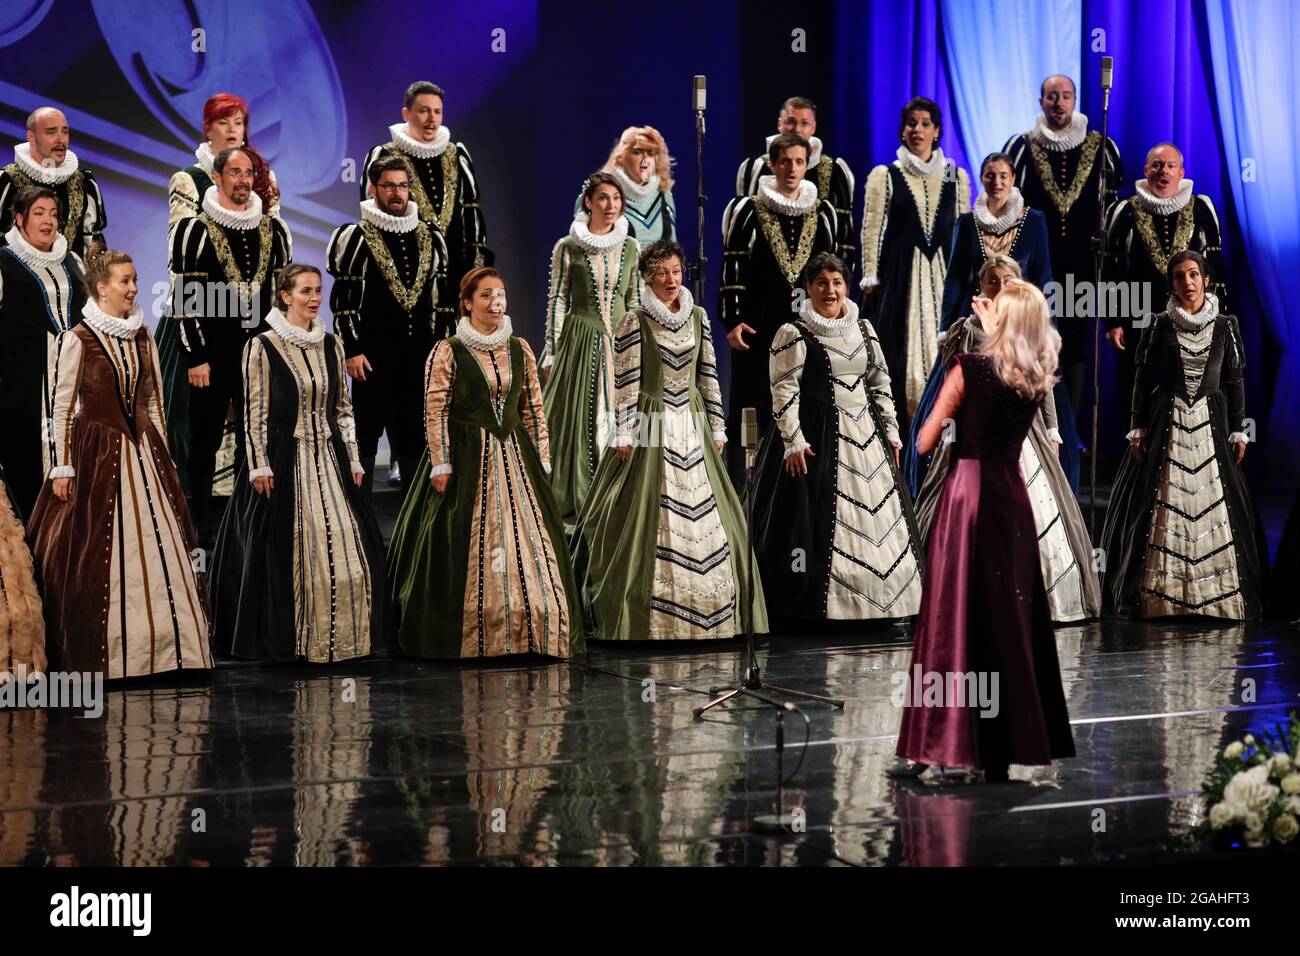 Bucharest, Romania - July 27, 2021: Romanian Madrigal National Choir (Corul Madrigal) performs on the stage of the Romanian Opera. Stock Photo